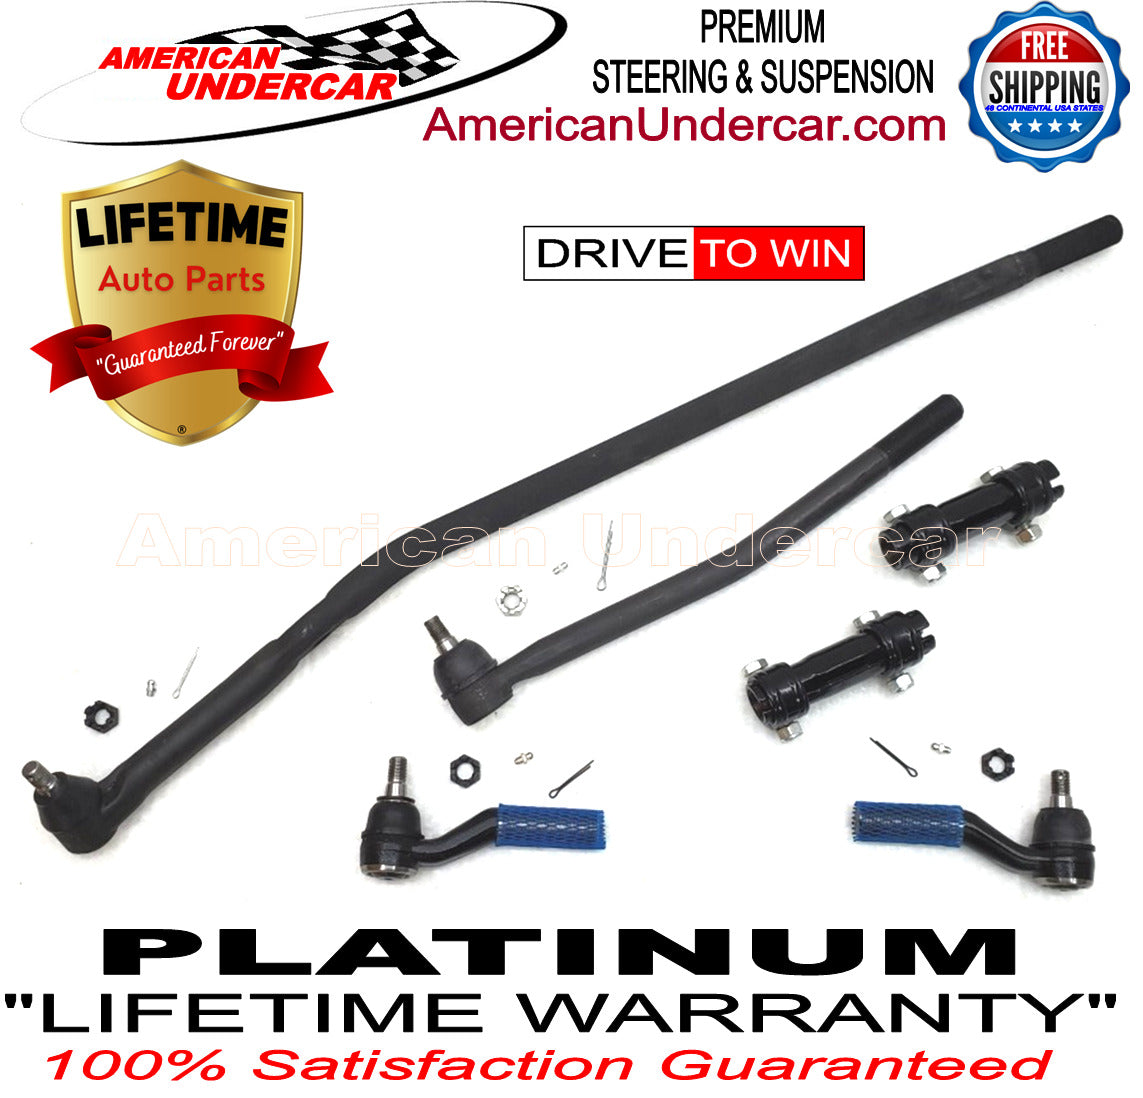 Lifetime Drag Link Tie Rod Ends Sleeve Steering Kit for 1992-2006 Ford E150 2WD